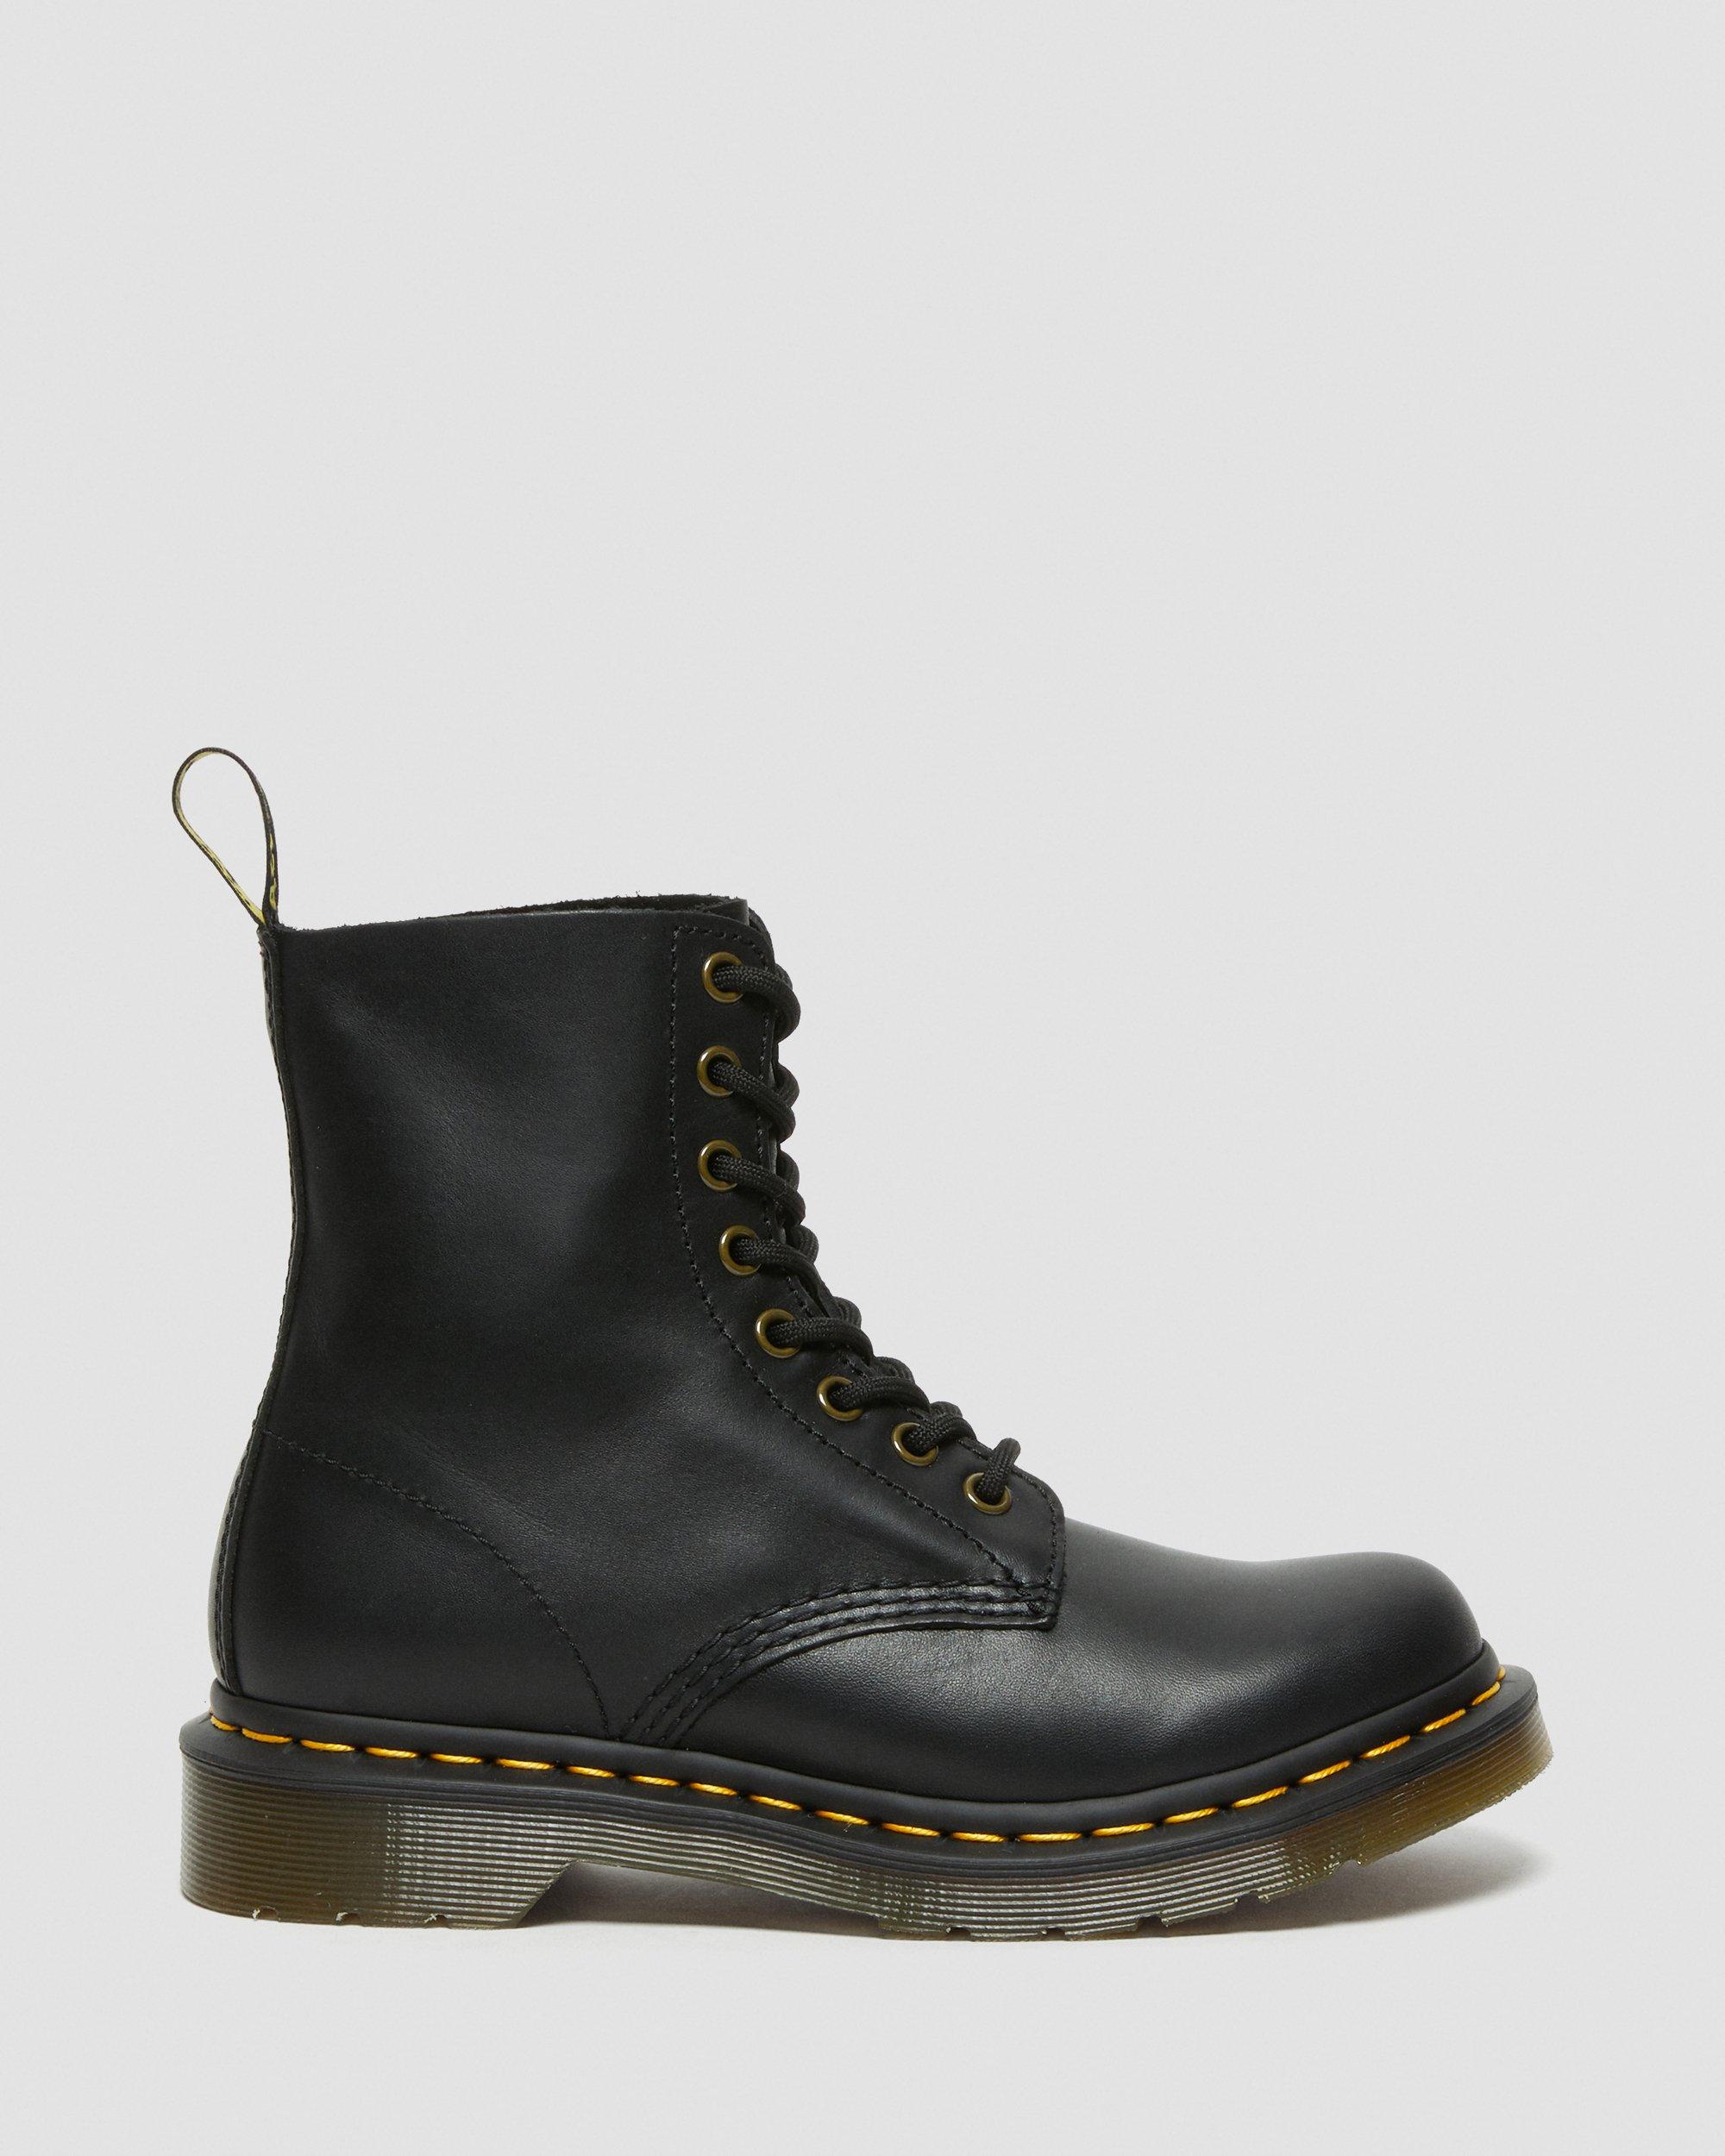 WANAMA LEATHER BOOTS | Dr. Martens 